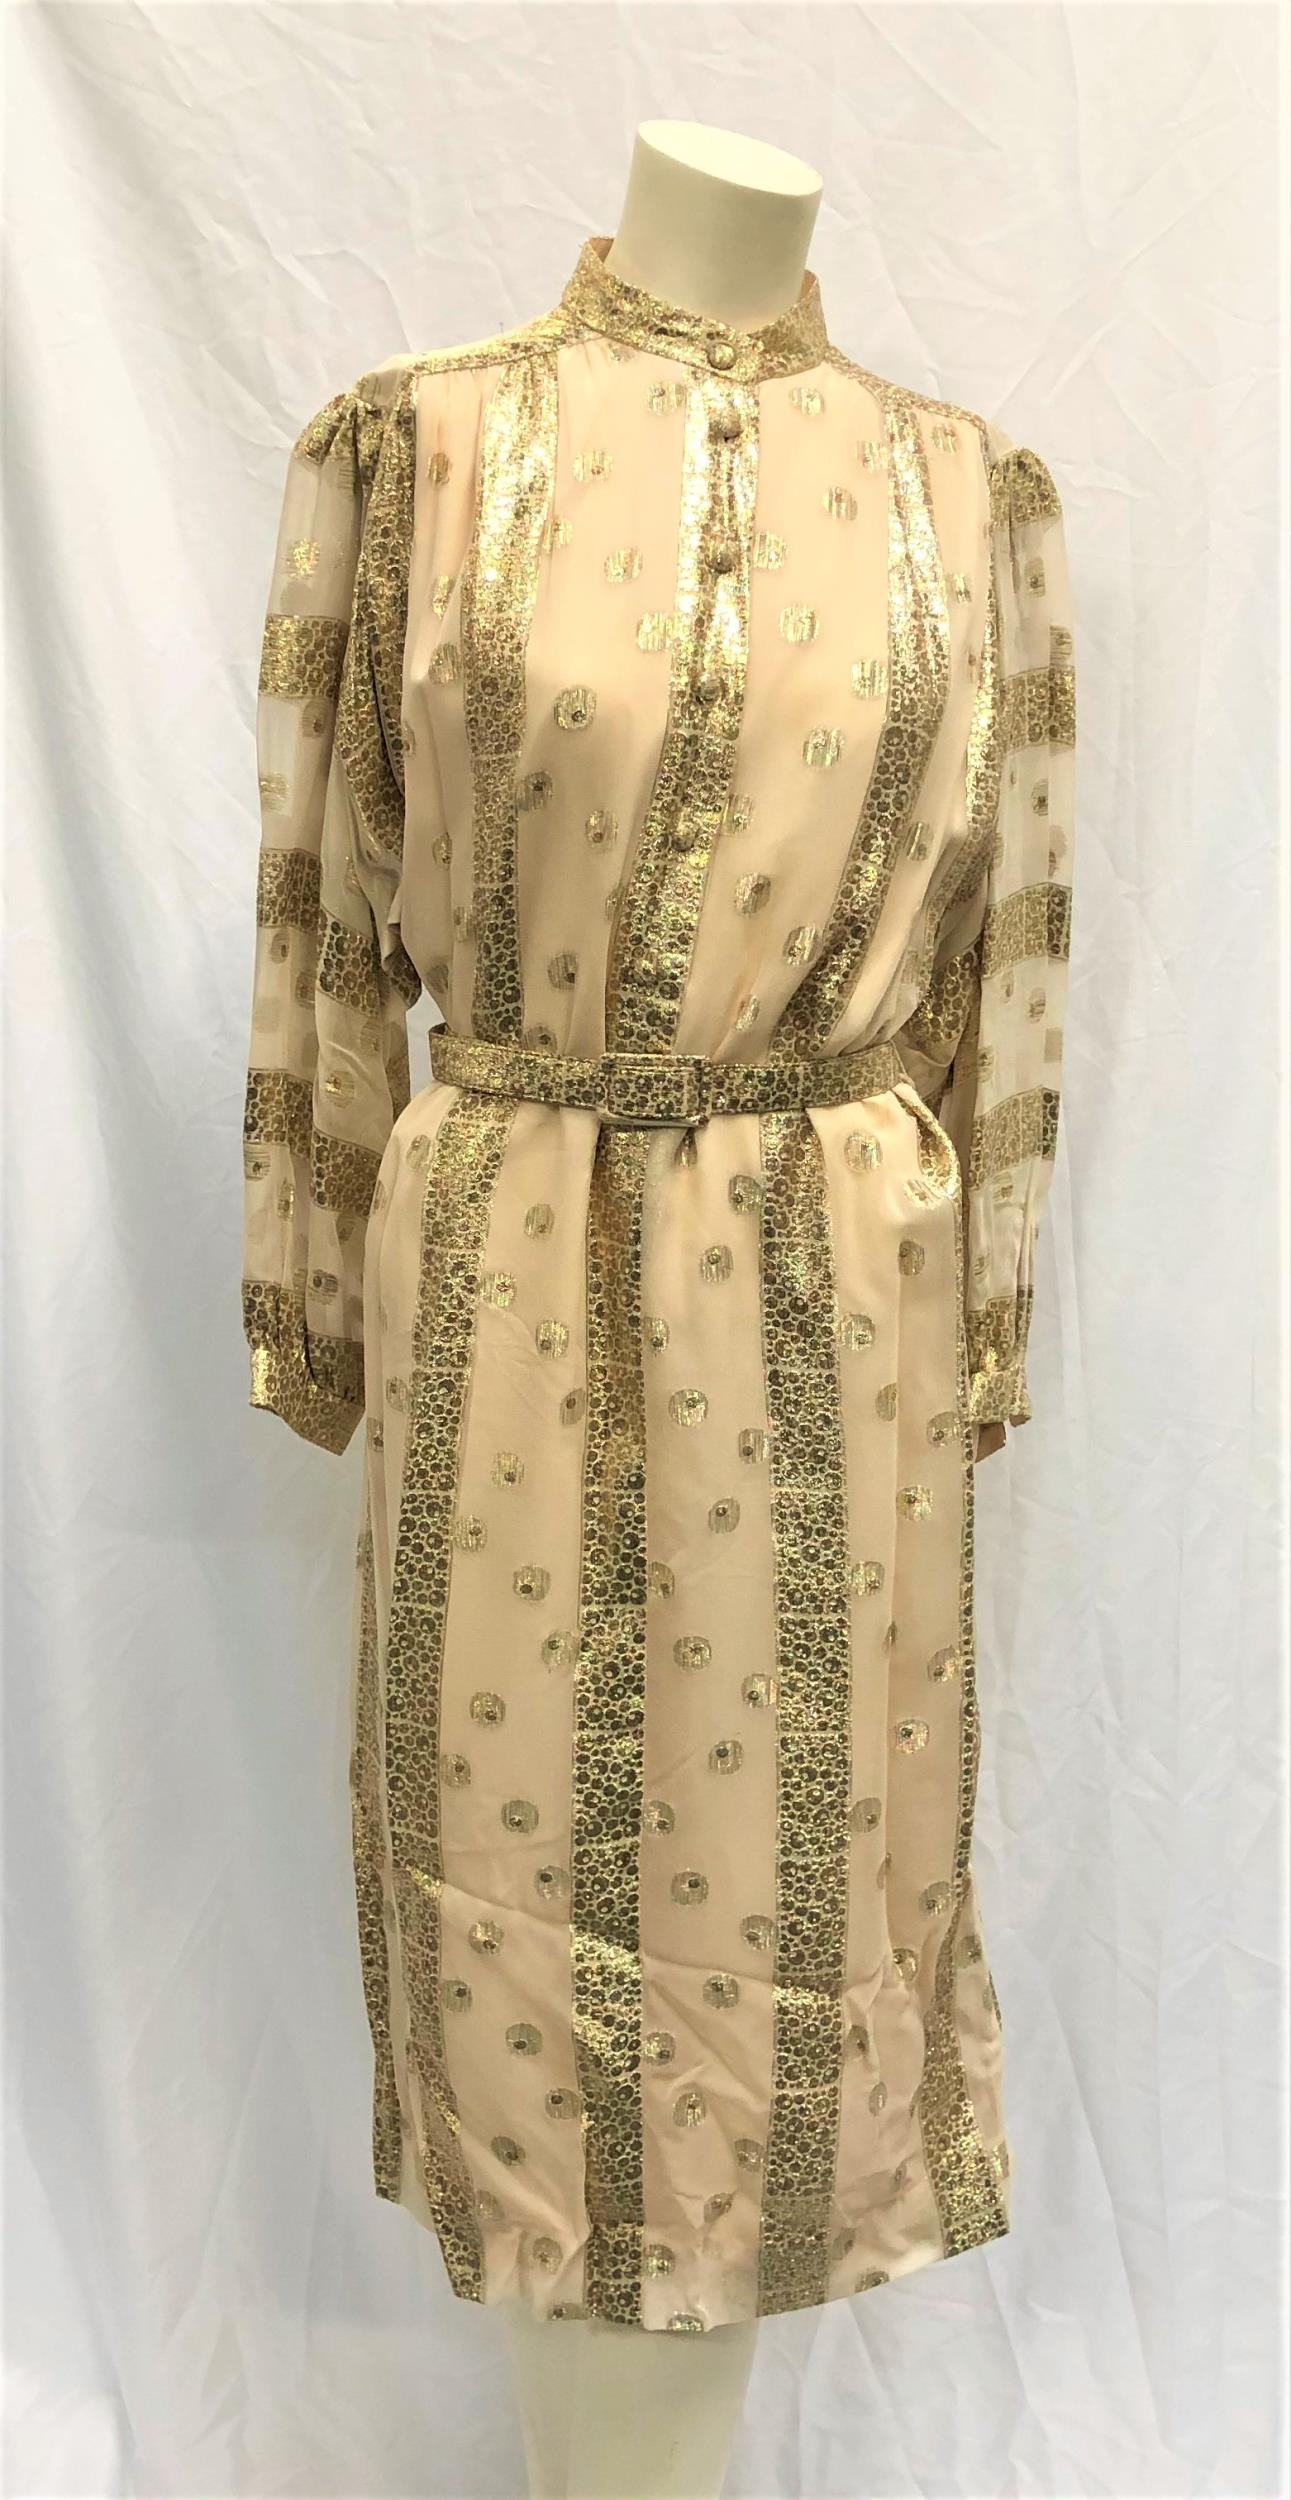 JANET LEIGH OWNED EVENING DRESS with gold detail, accompanied by Corner Collectibles certificate